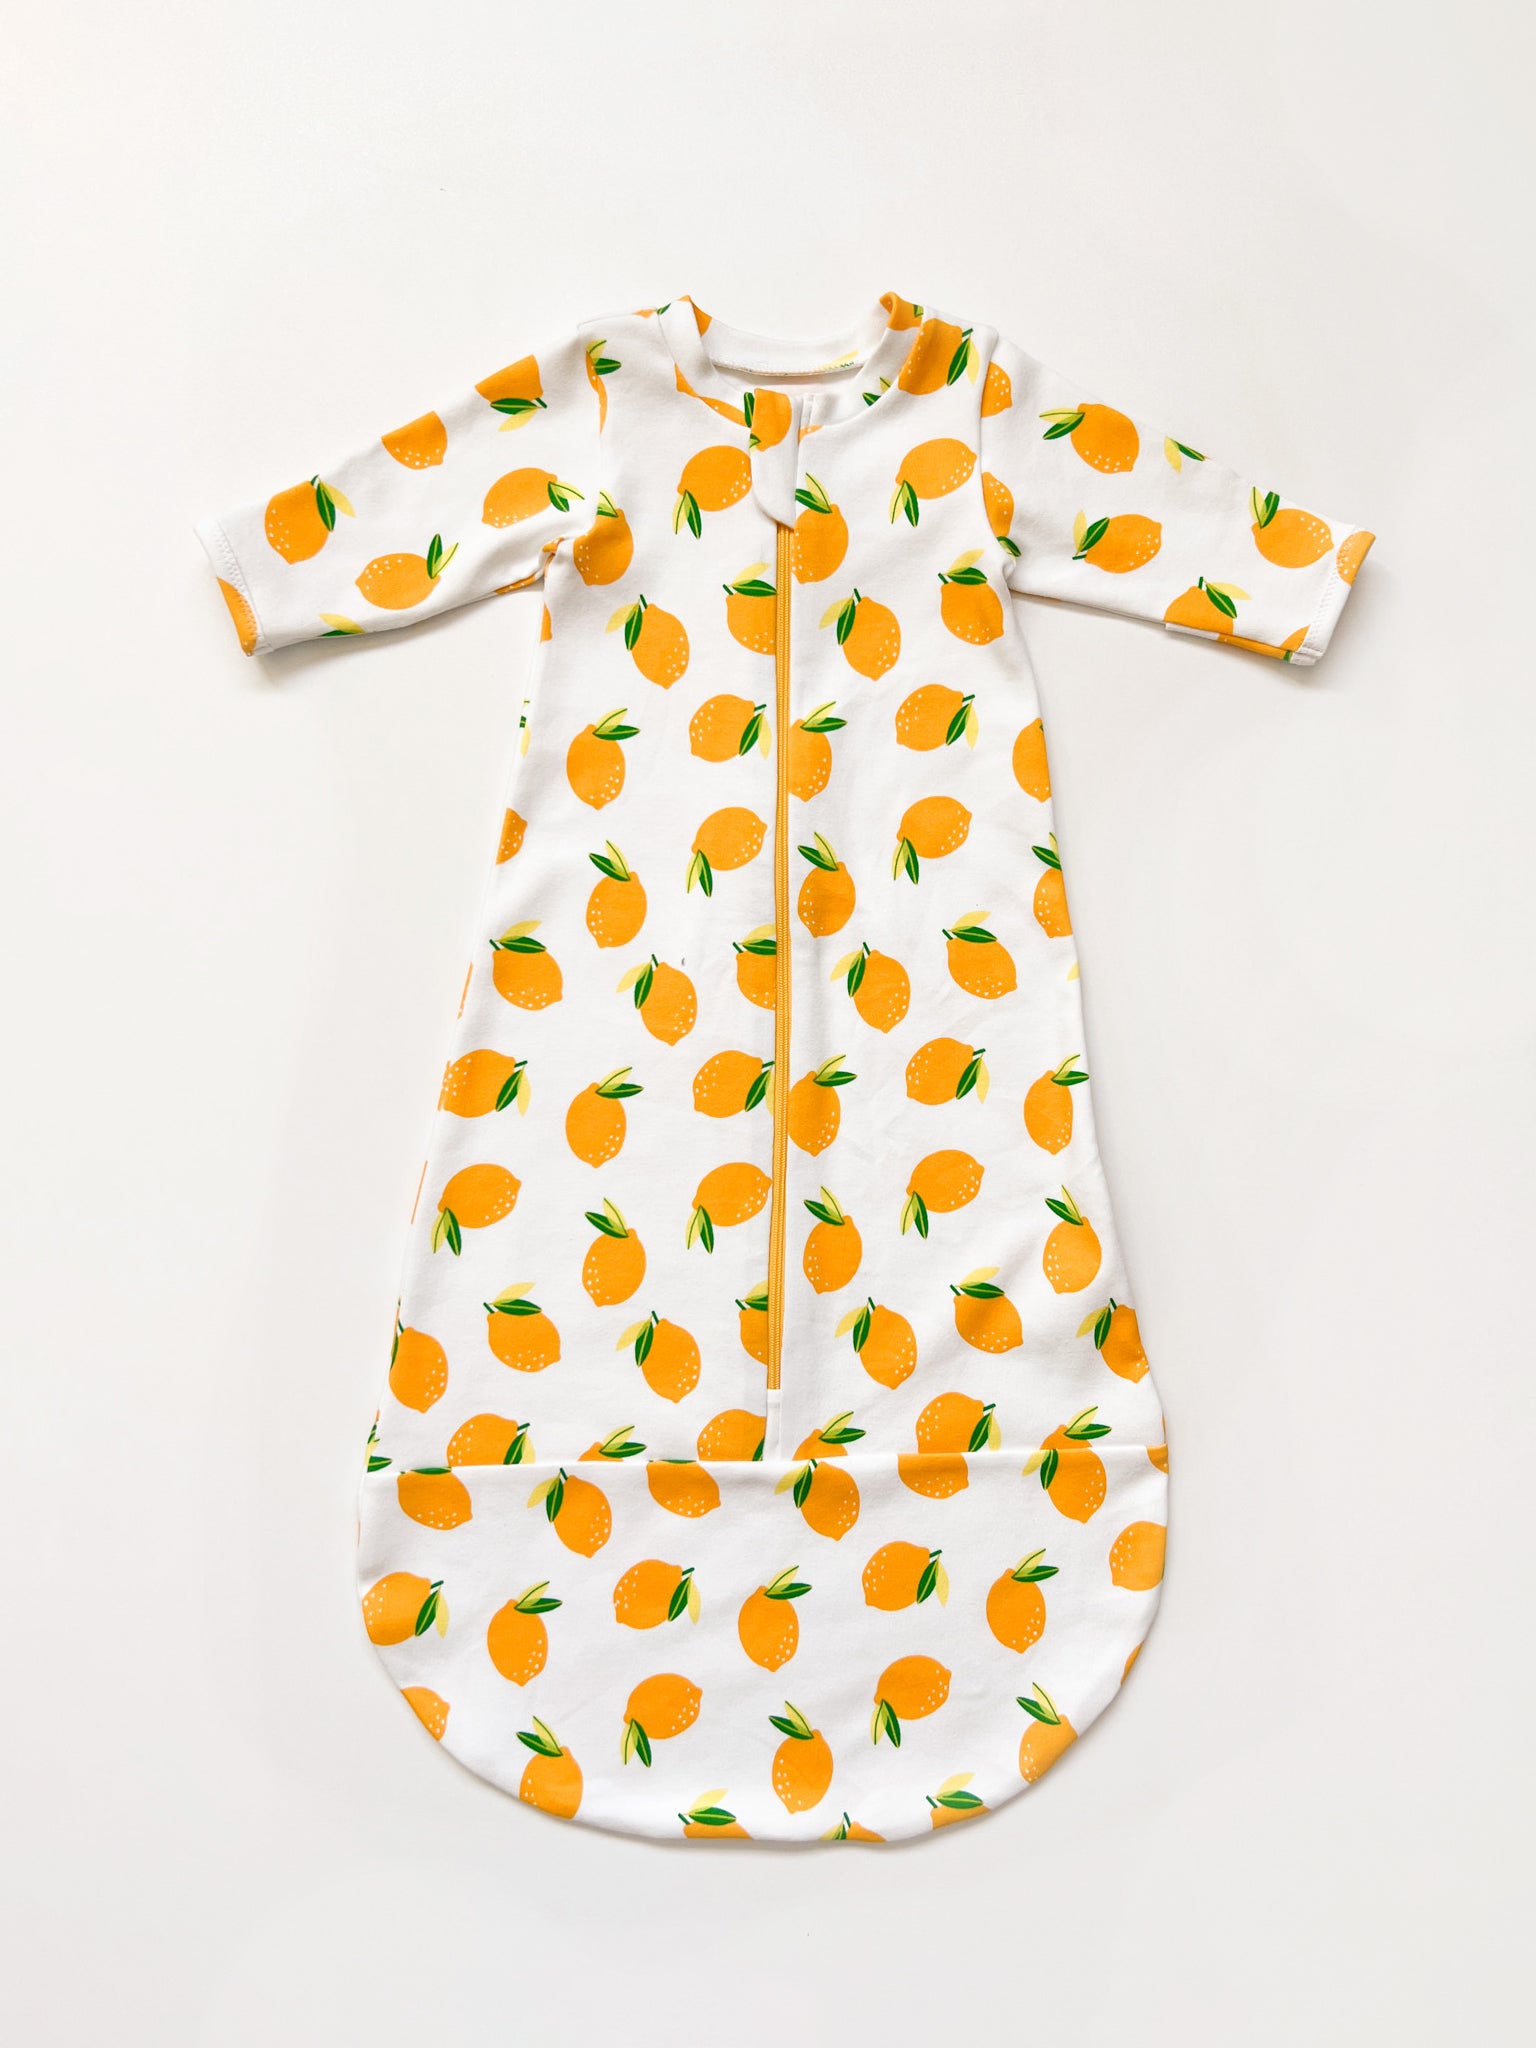 Flatlay of a baby sleepsack with zipper. The sleepsack is made in a white knit fabric with lemon print.